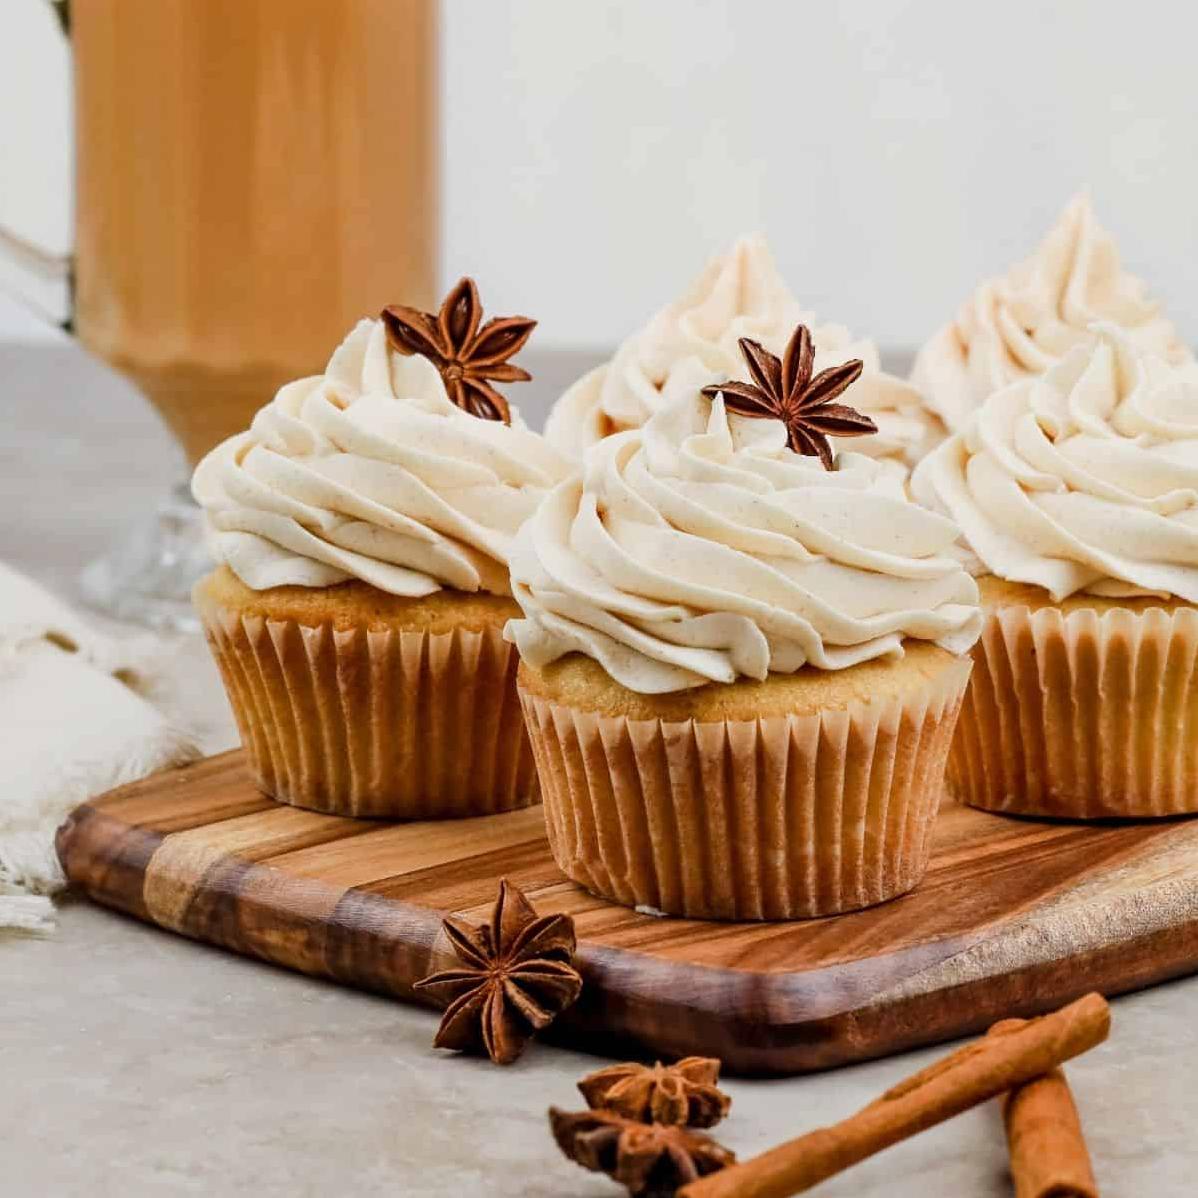  Chickpea flour and almond flour are the perfect gluten-free alternative for a fluffy and moist cupcake.